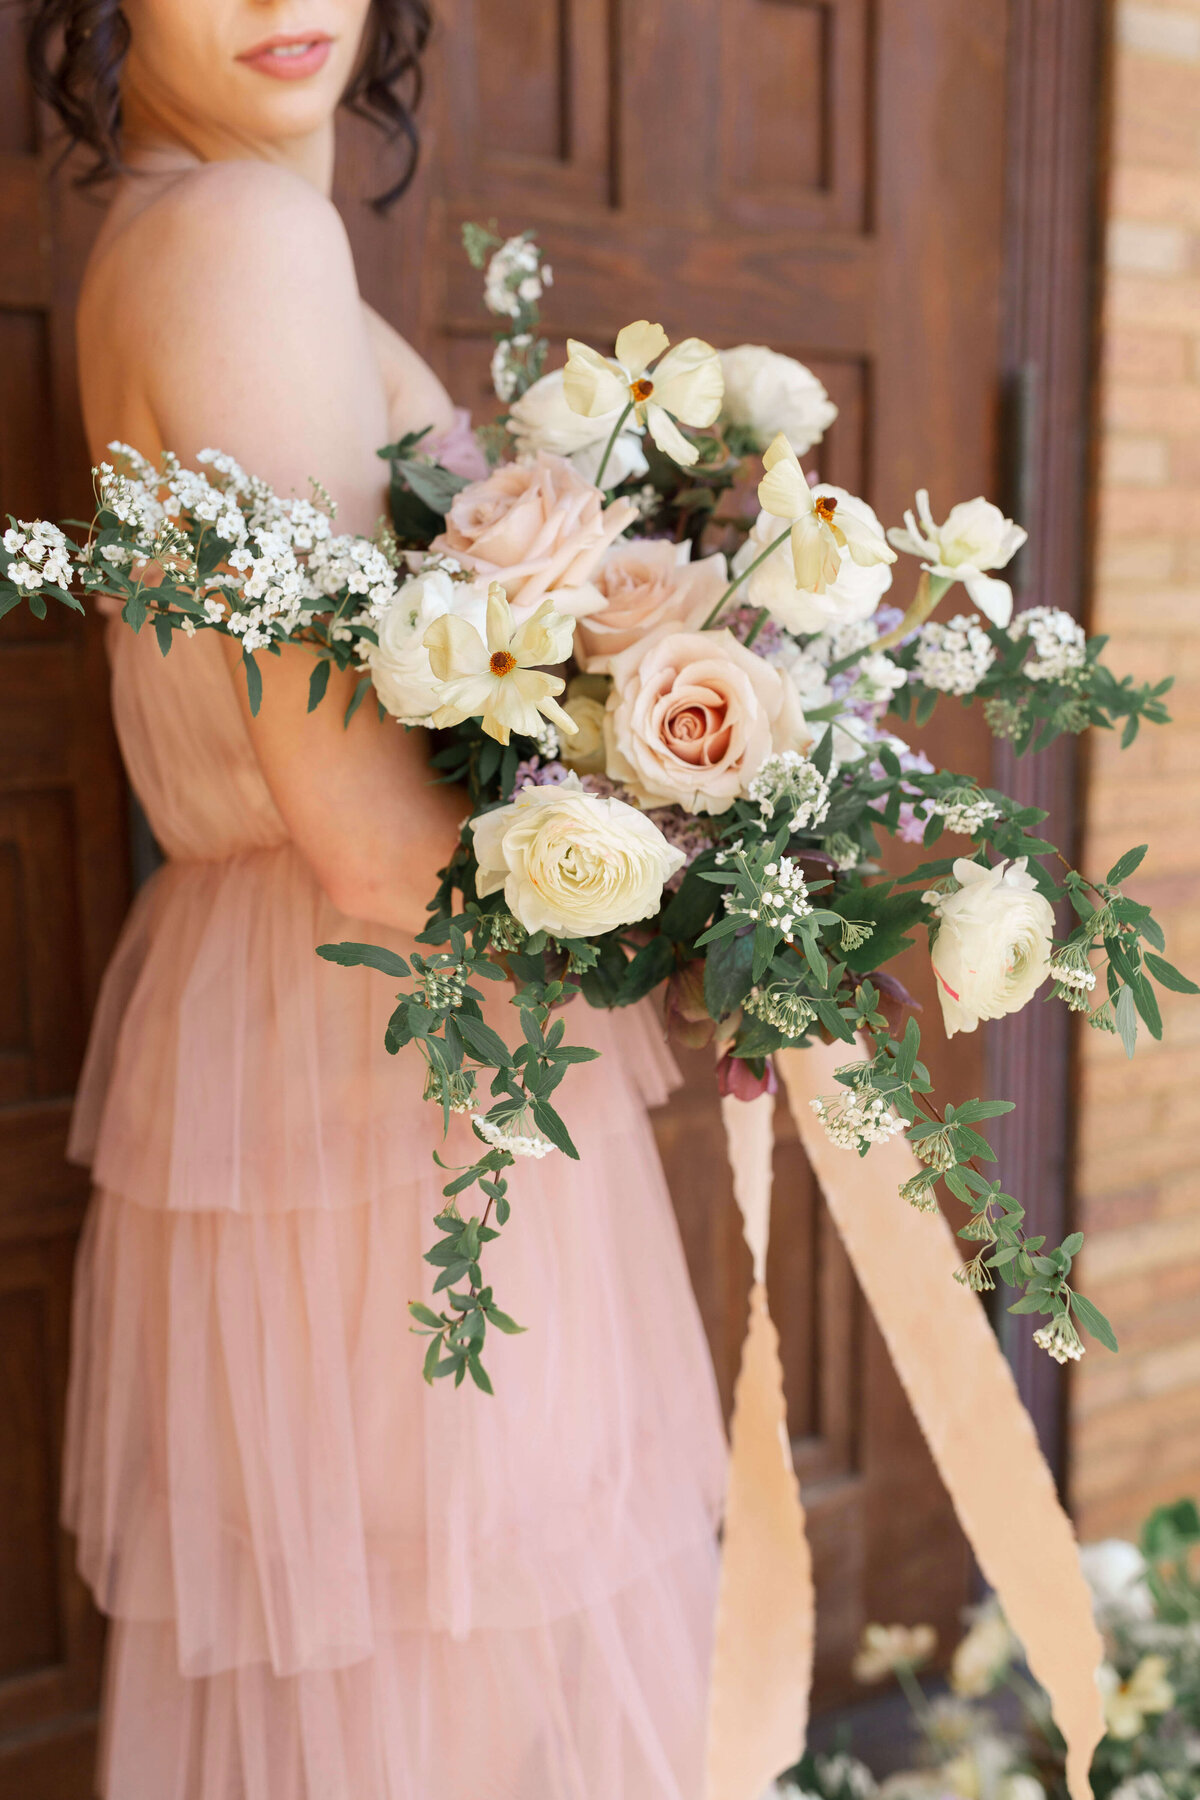 woman holding large bouquet of flowers in ivory, peach, pale pink, lavender and greenery